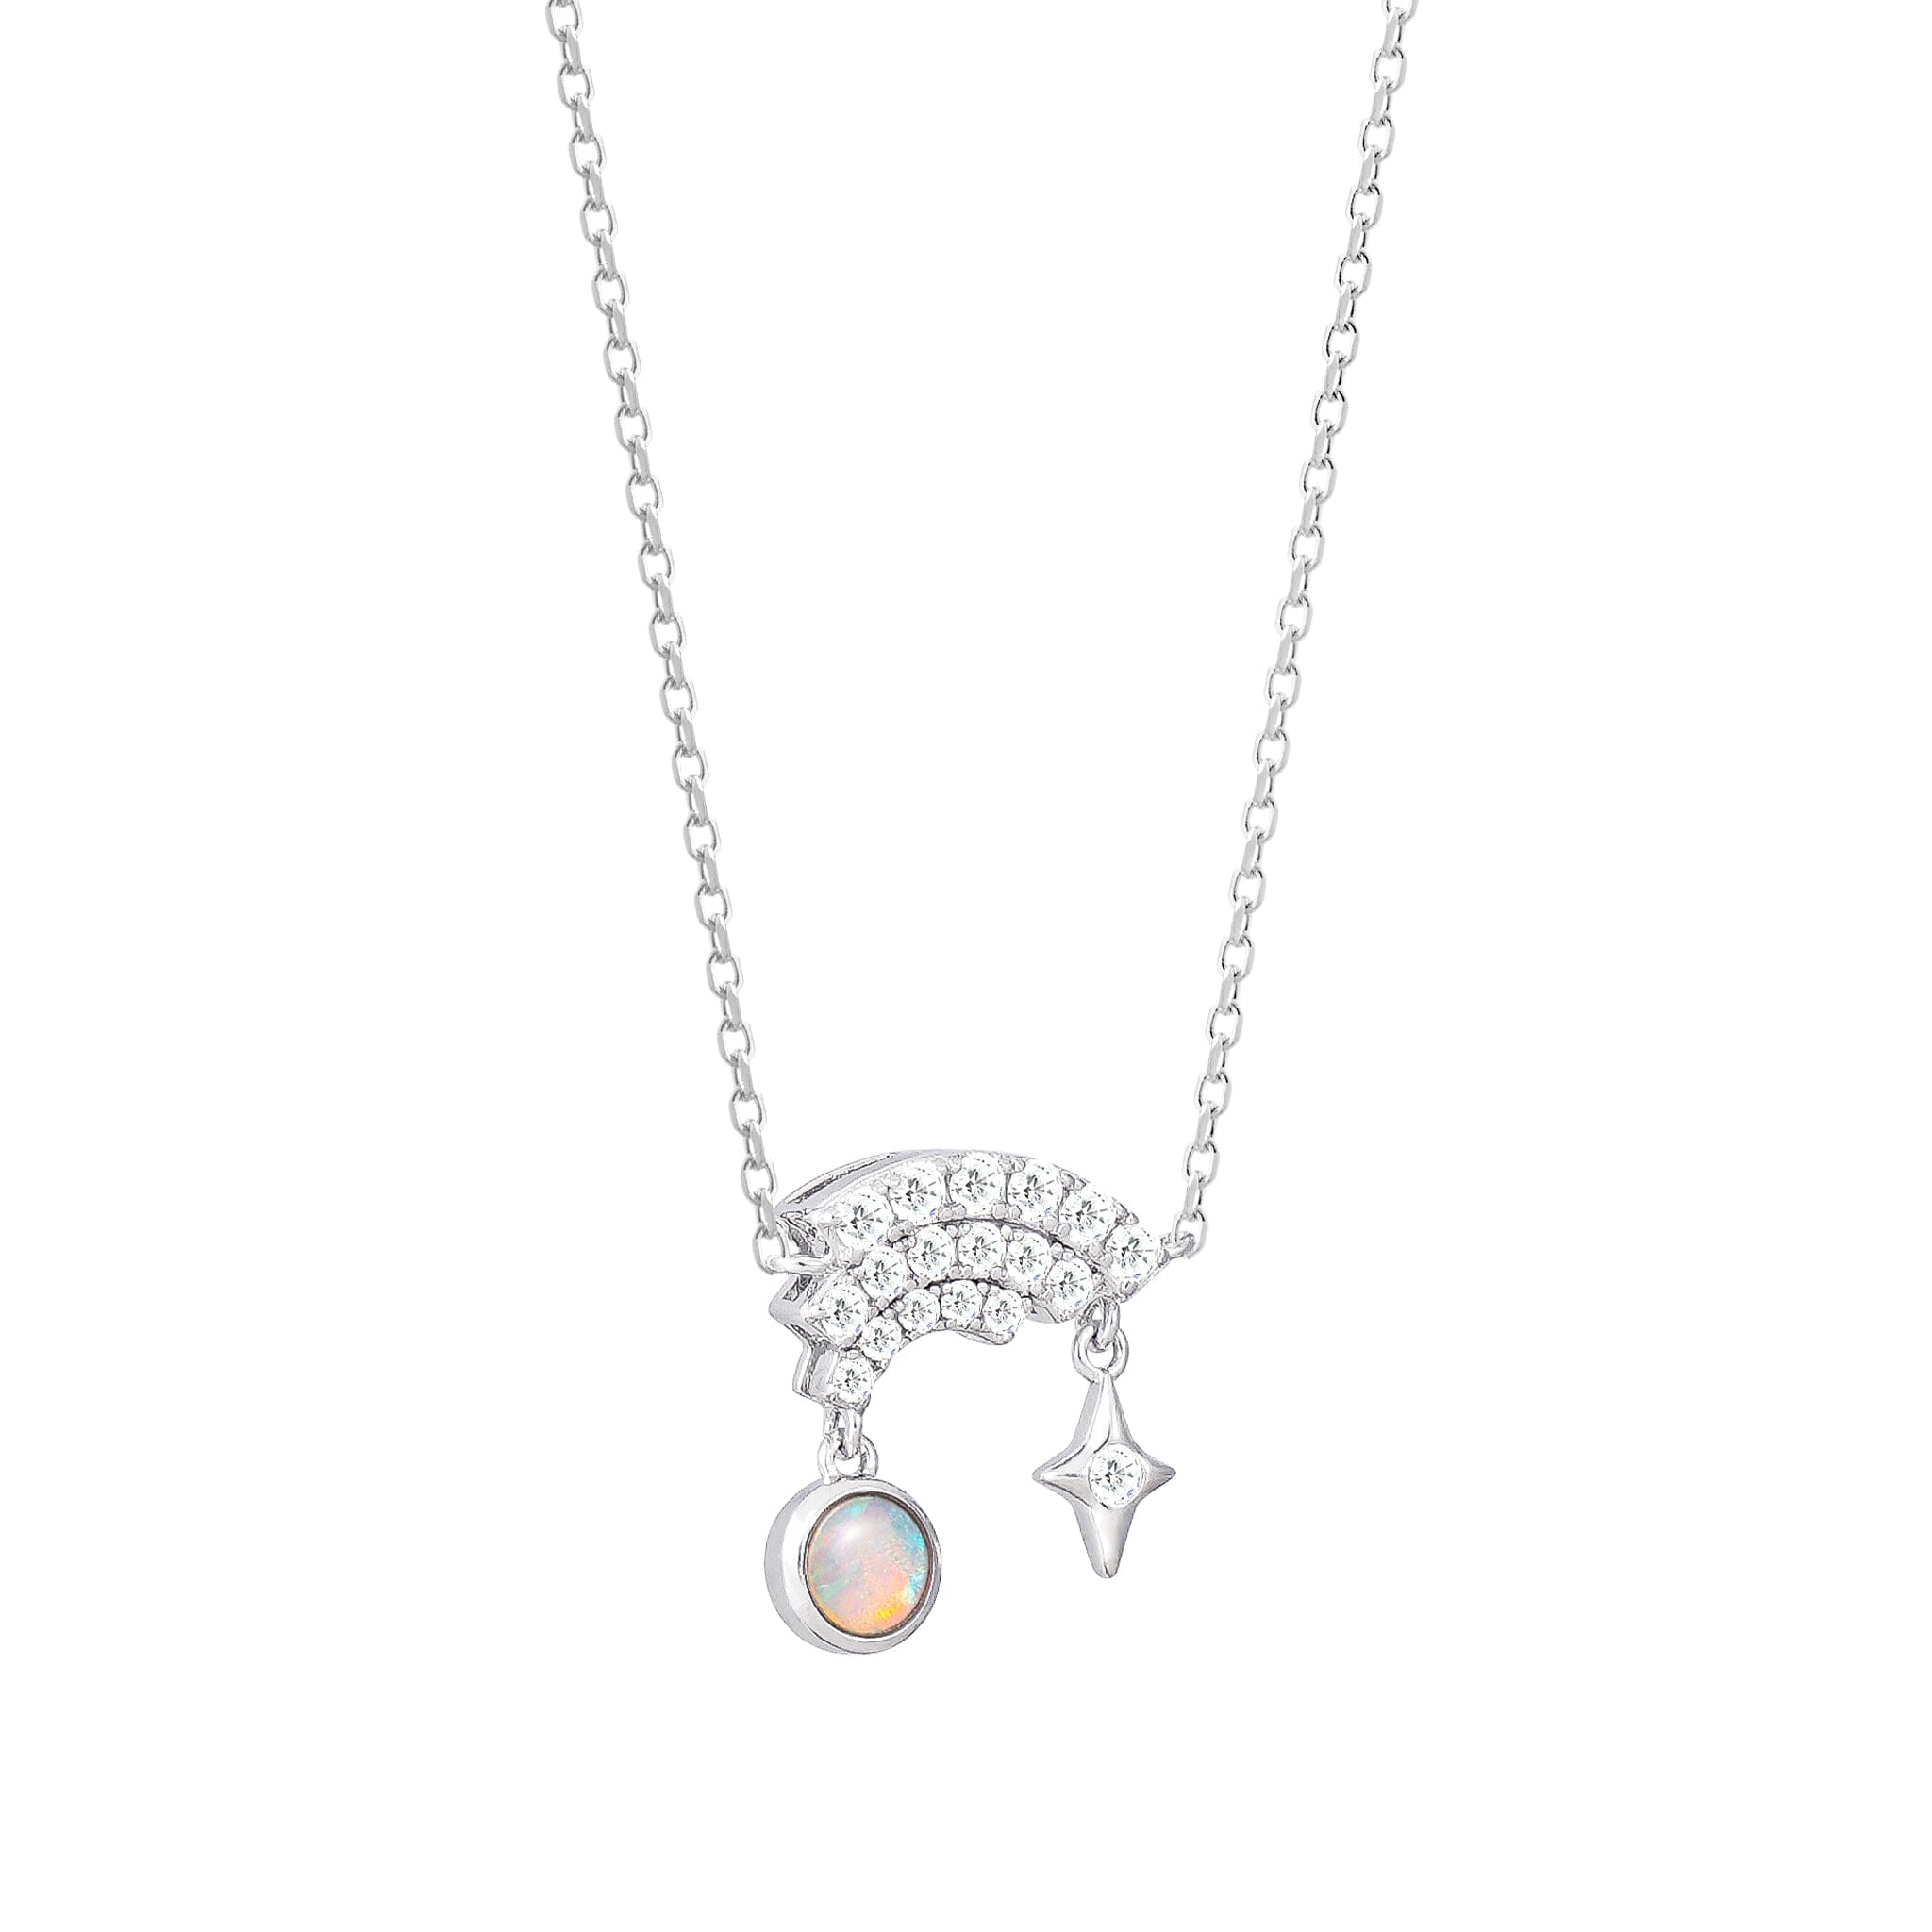 Women's Rainbow Necklace of with Opalite Necklaces WAA FASHION GROUP Silver Adjustable 